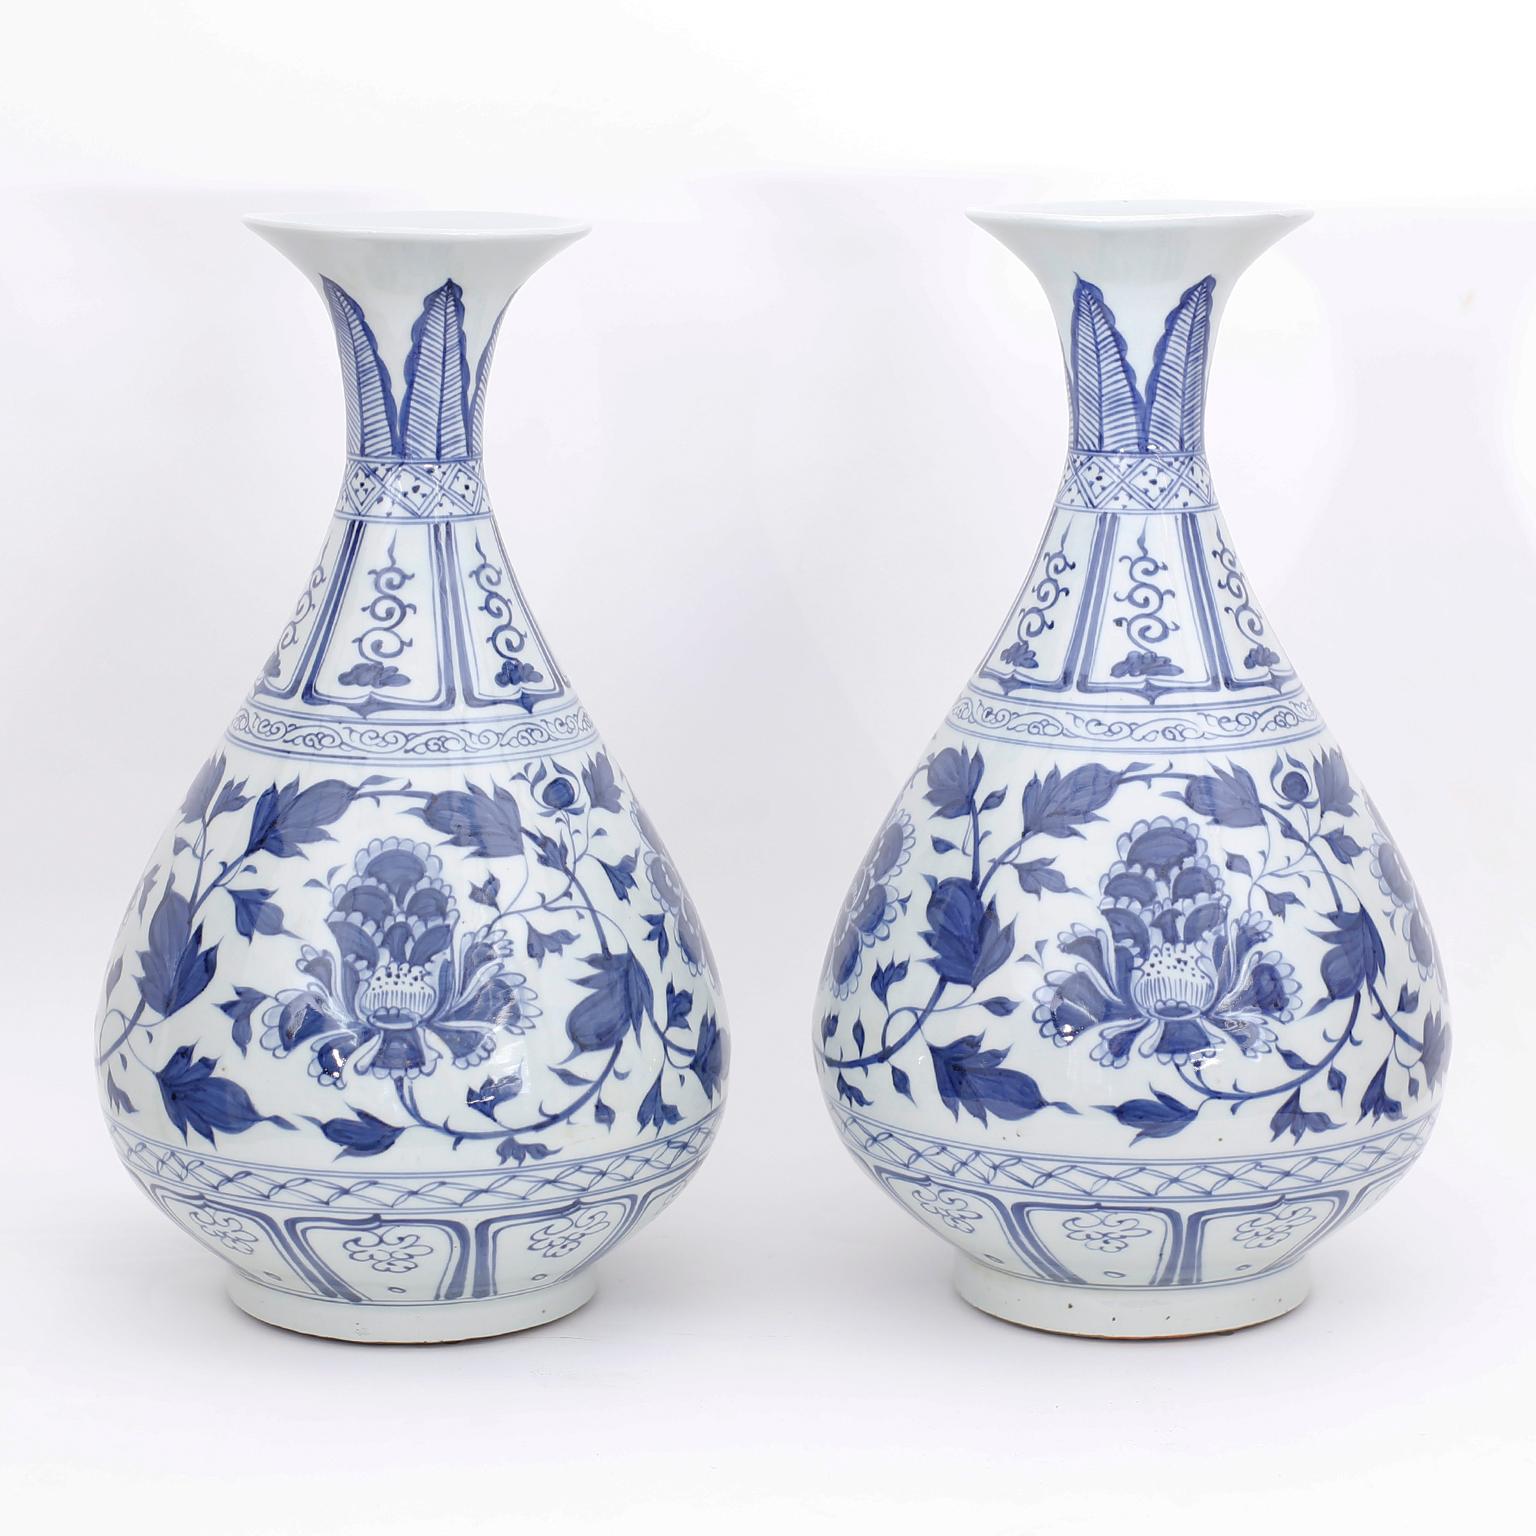 Pair of Chinese blue and white vases, in the Chinese Export manner, with Classic form and hand decorated with floral designs.